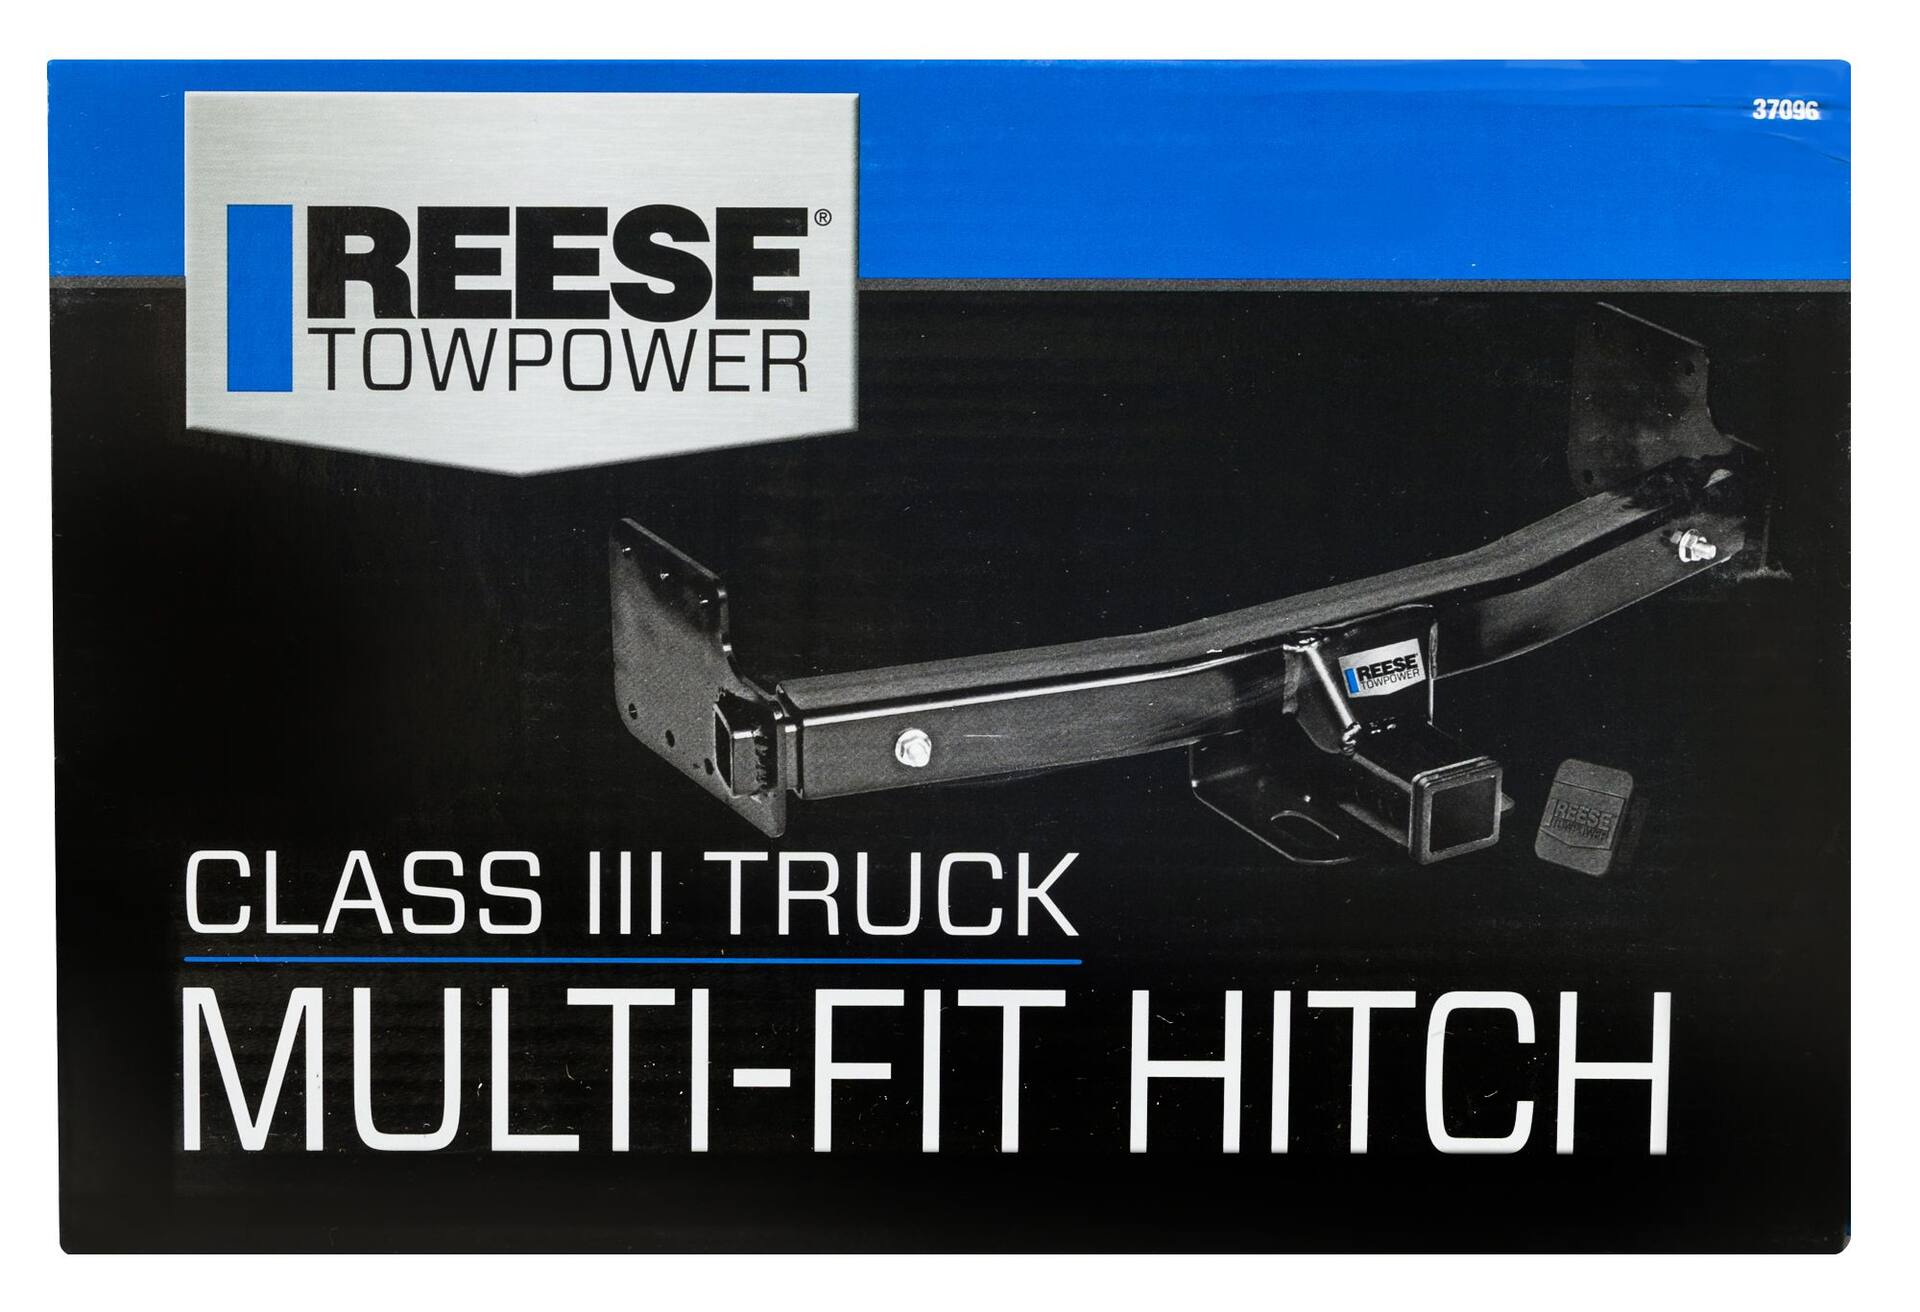 REESE Towpower Class-III/IV Multi-Fit Trailer & Towing Hitch with